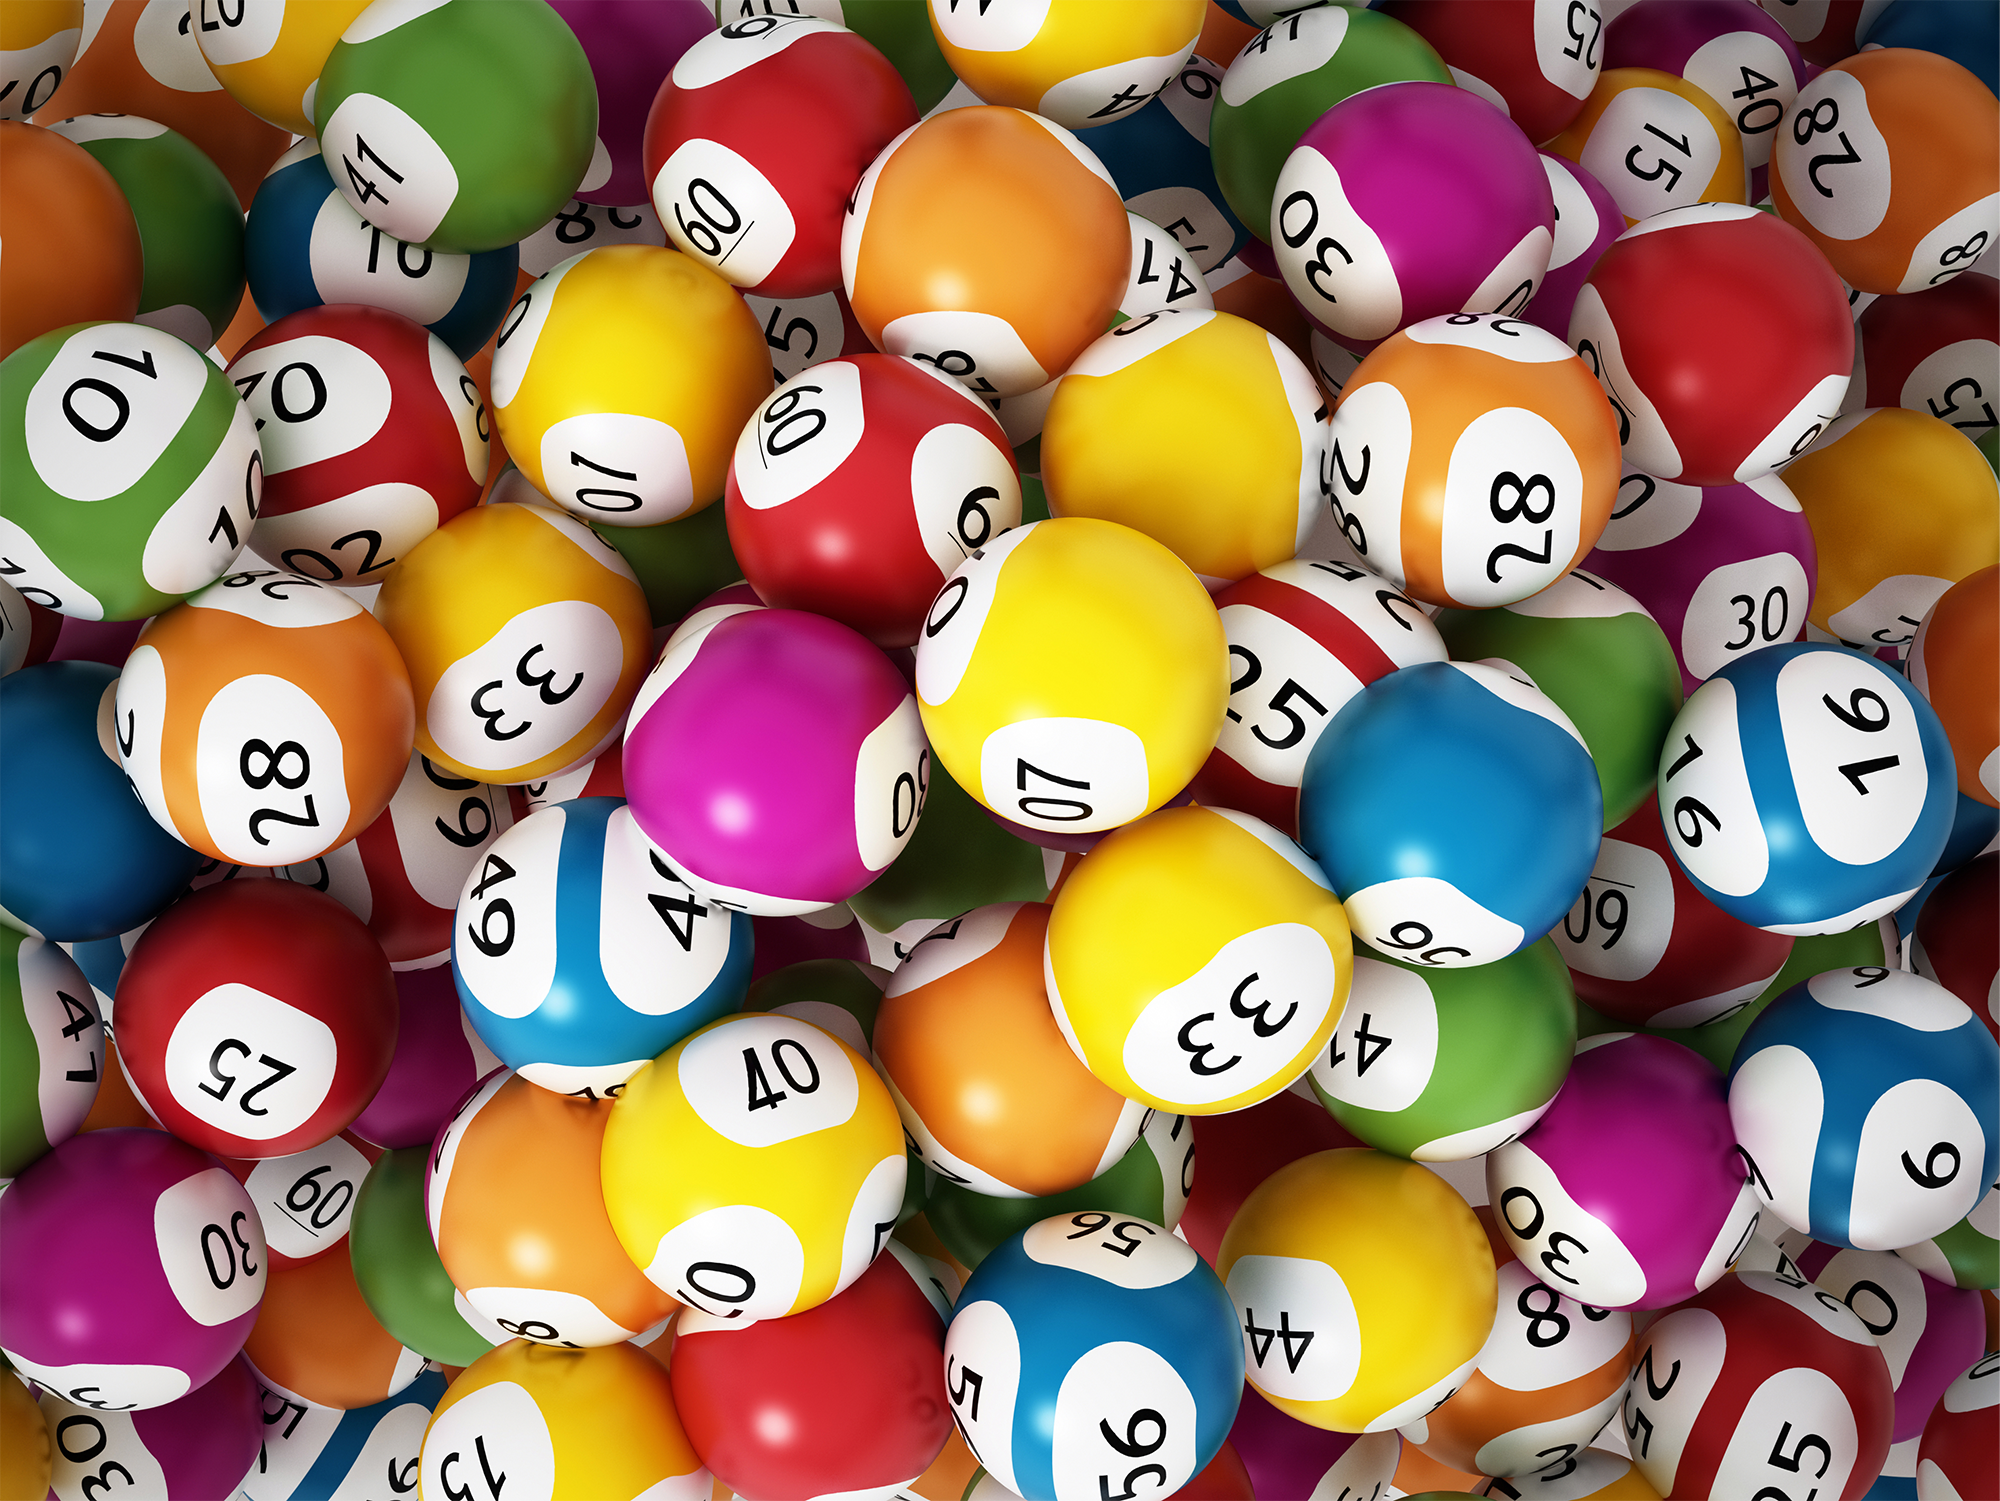 Lottery balls in lots of different bright colours with different numbers printed on them in black